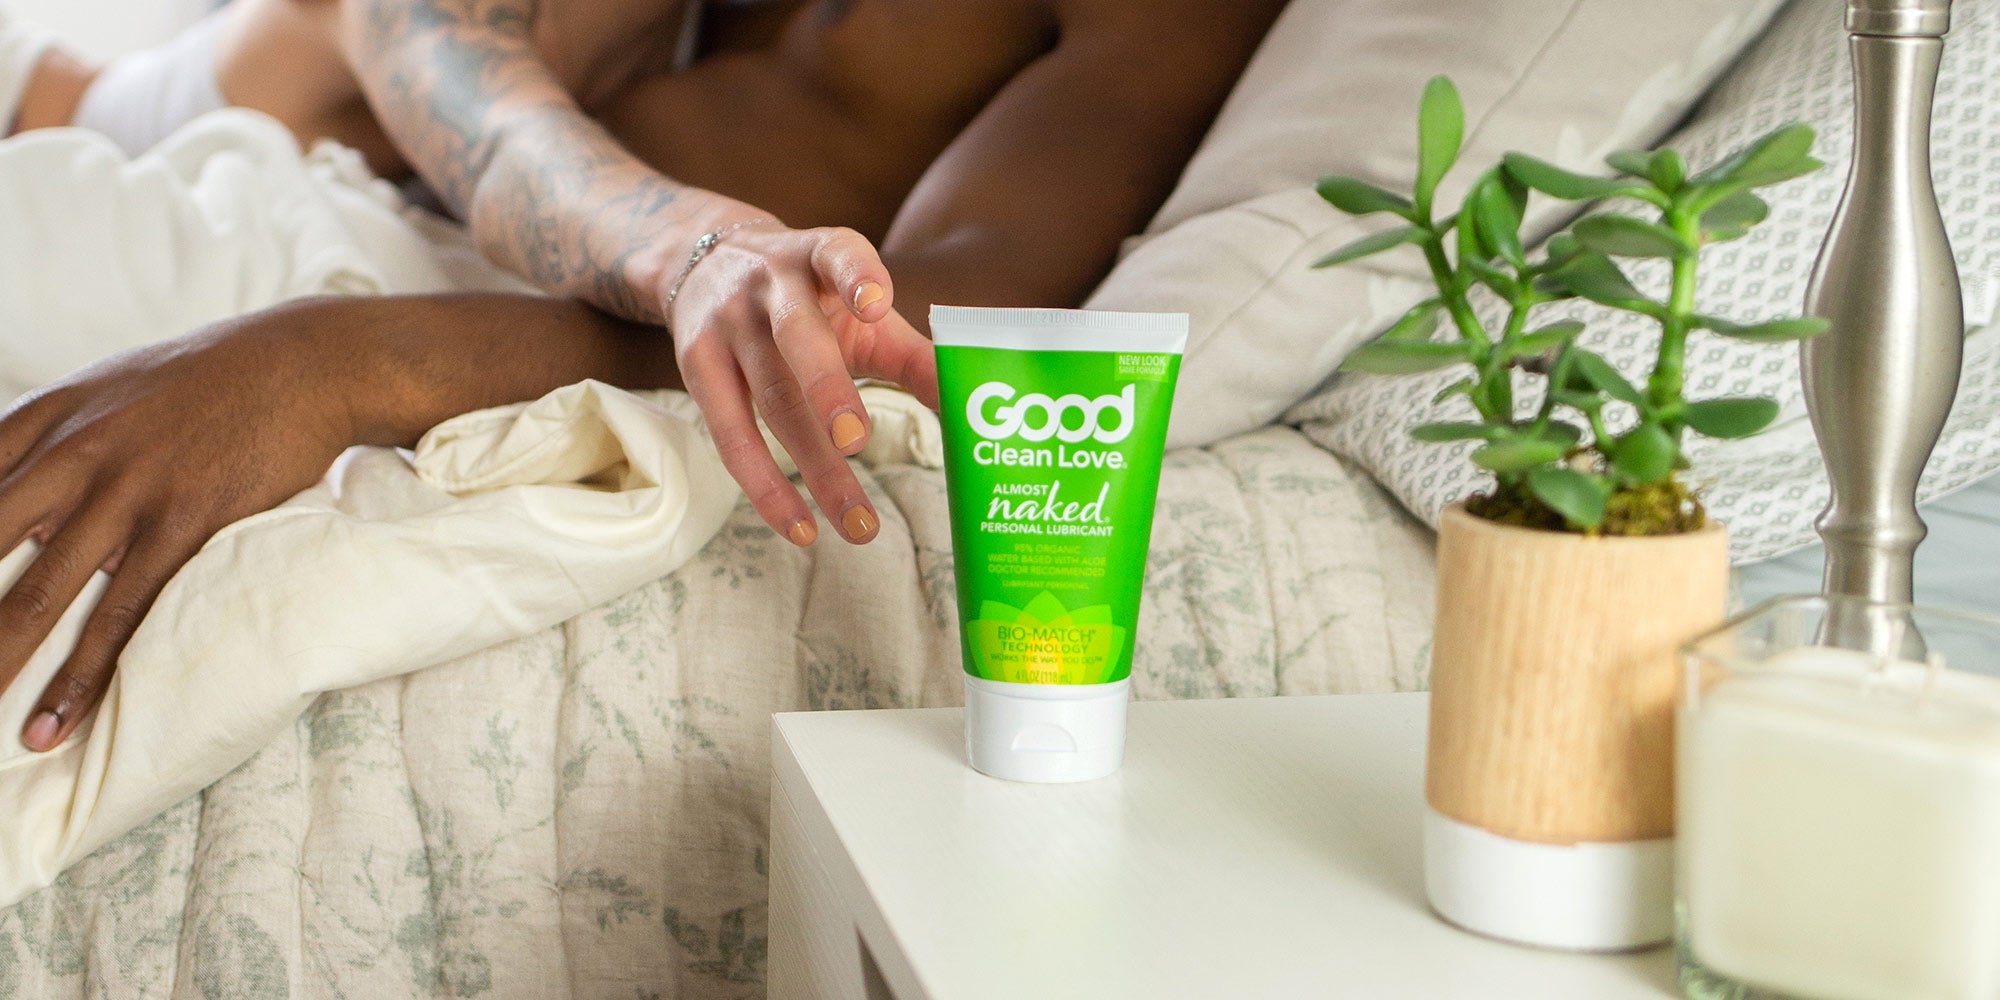 Good Clean Love Almost Naked Organic Personal Lubricant is made with aloe vera and infused with a touch of lemon and vanilla, giving it a light organic flavor. This organic water based lubricant is designed for the most sensitive skin types. 